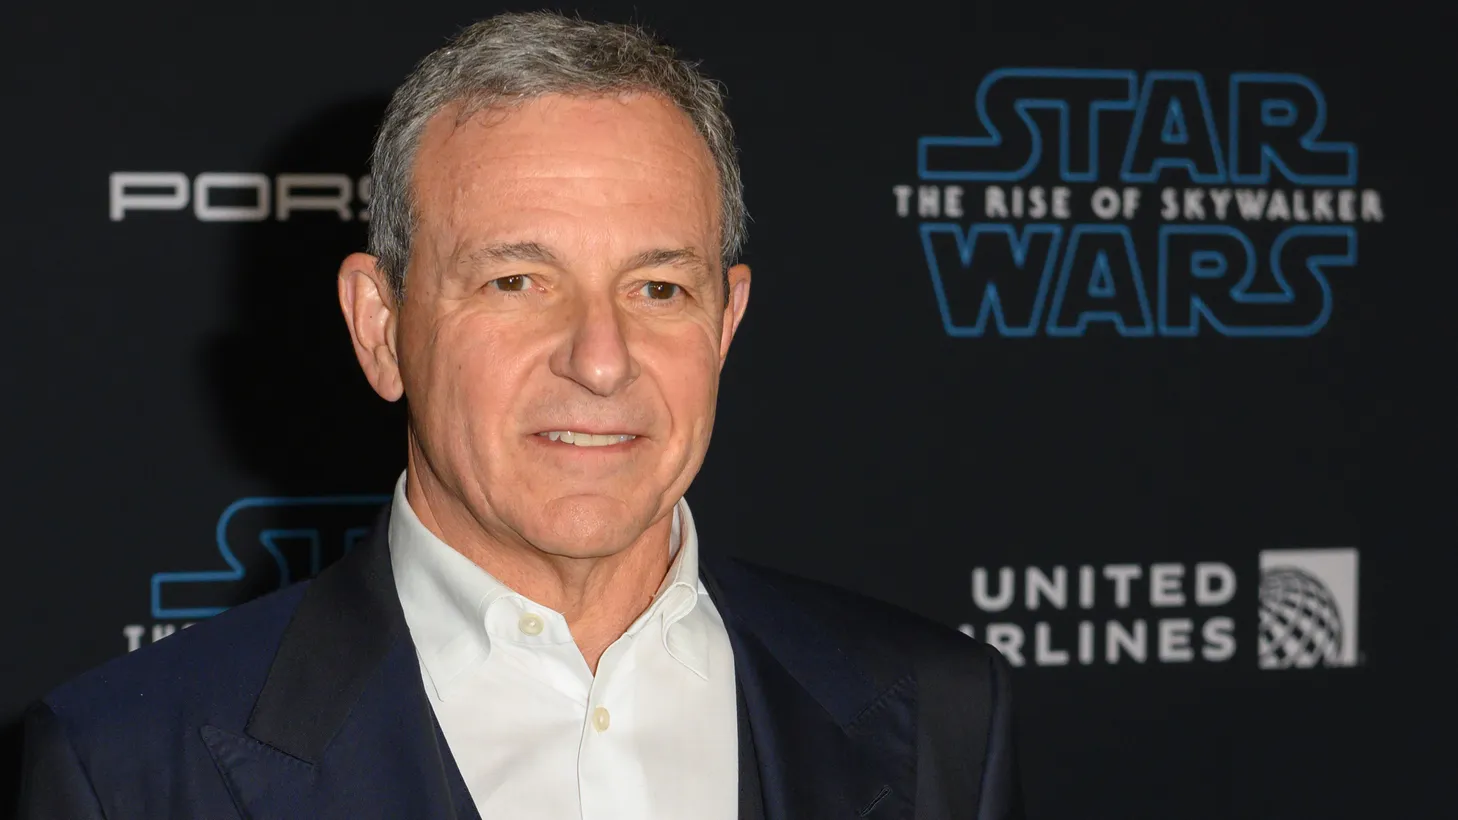 The then Walt Disney Company Chairman and CEO Bob Iger attends the premiere of "Star Wars: The Rise of Skywalker" in Hollywood on December 16, 2019.